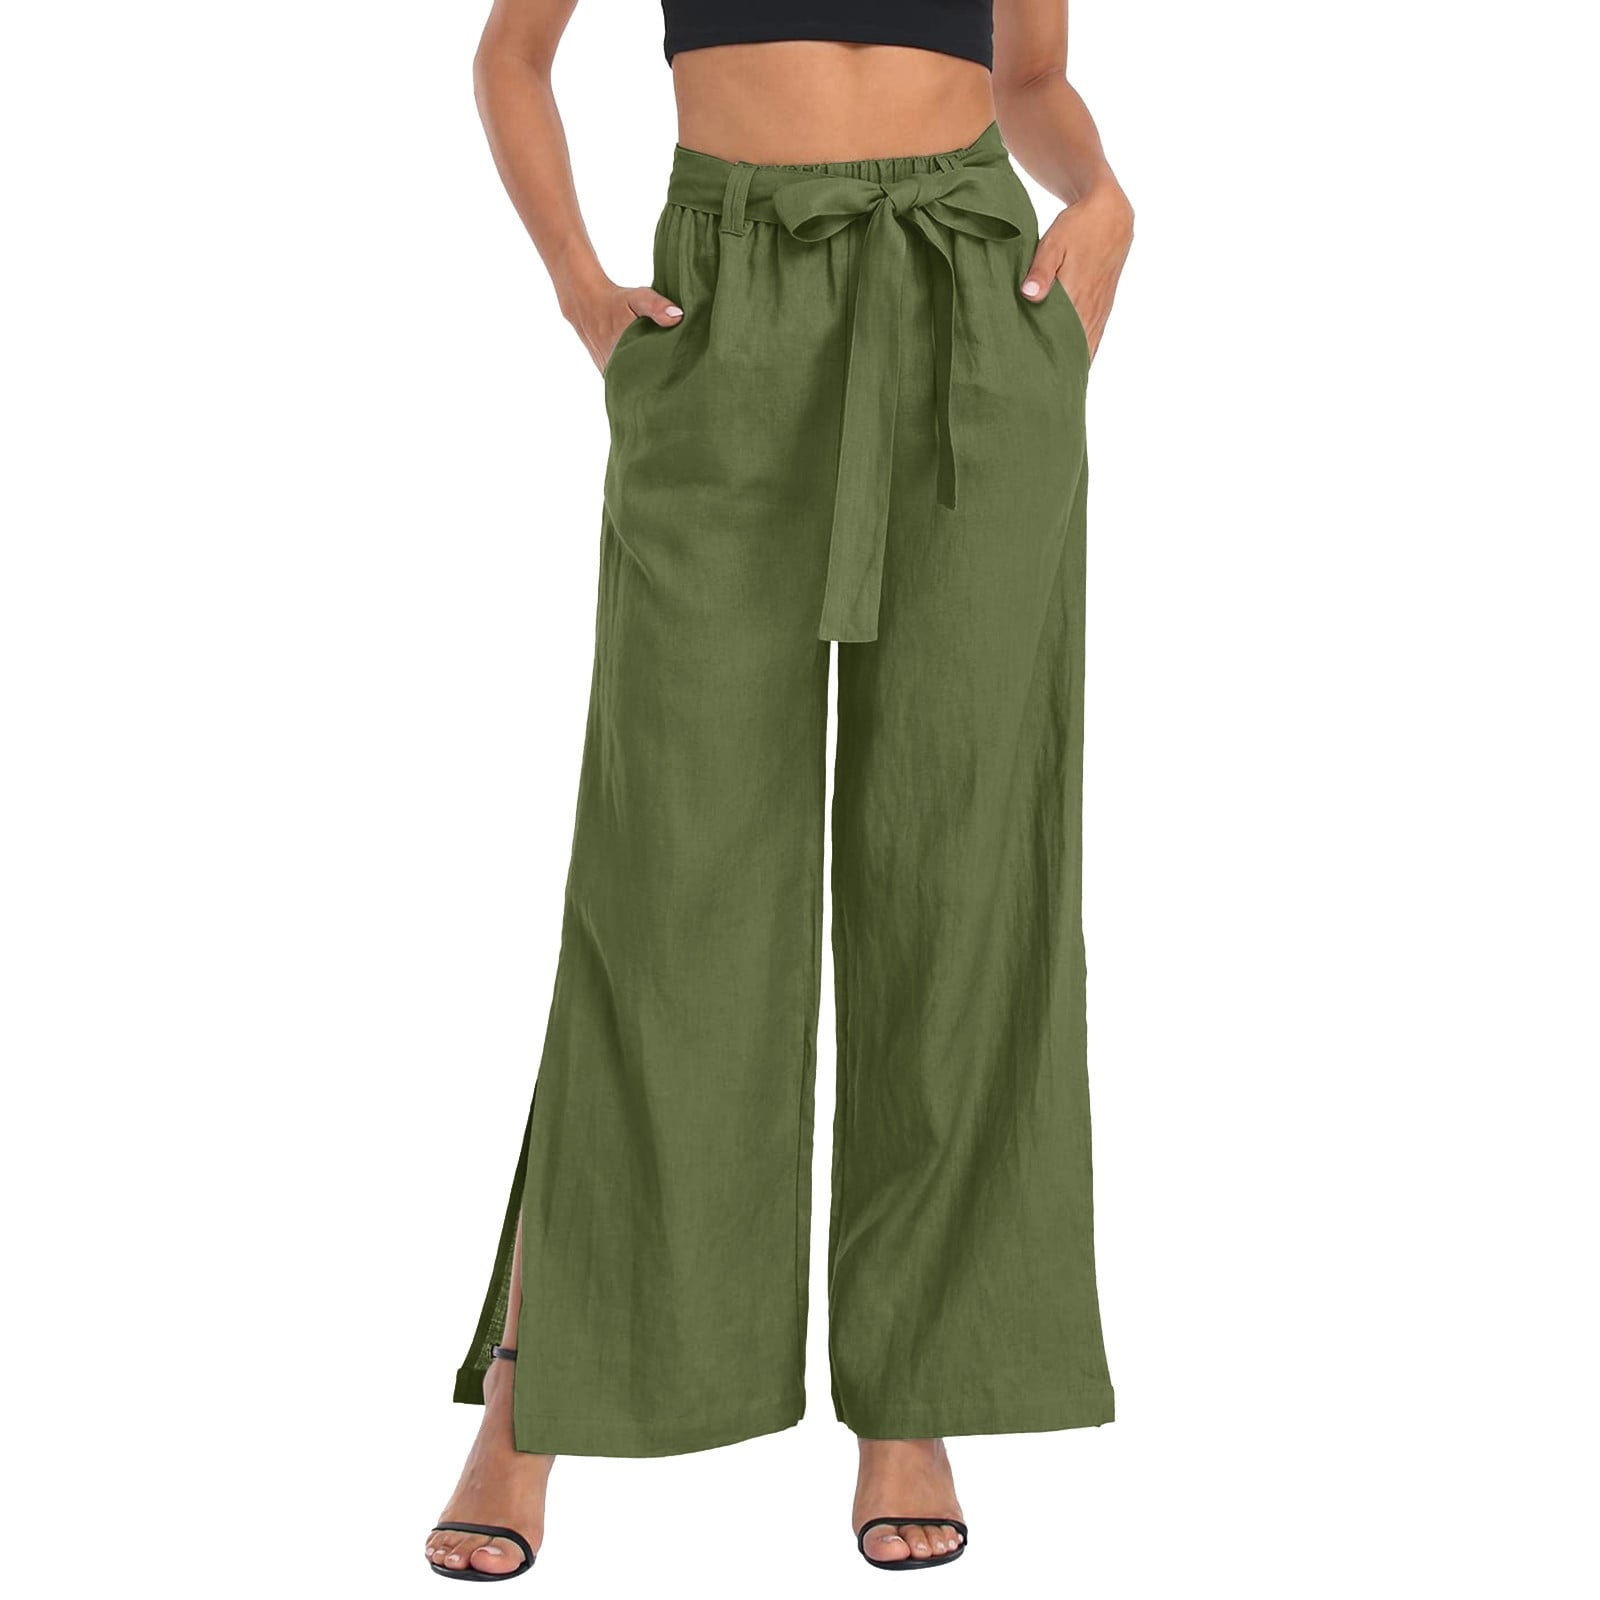  Womens Casual Summer Pants Drawstring Loose Fit Cropped Pants  Straight Elastic Waist Lounge Pants with Pockets pant adjuster waist smaller  newspaper pants dress stretch twill cropped wide leg pants : 服裝，鞋子和珠寶